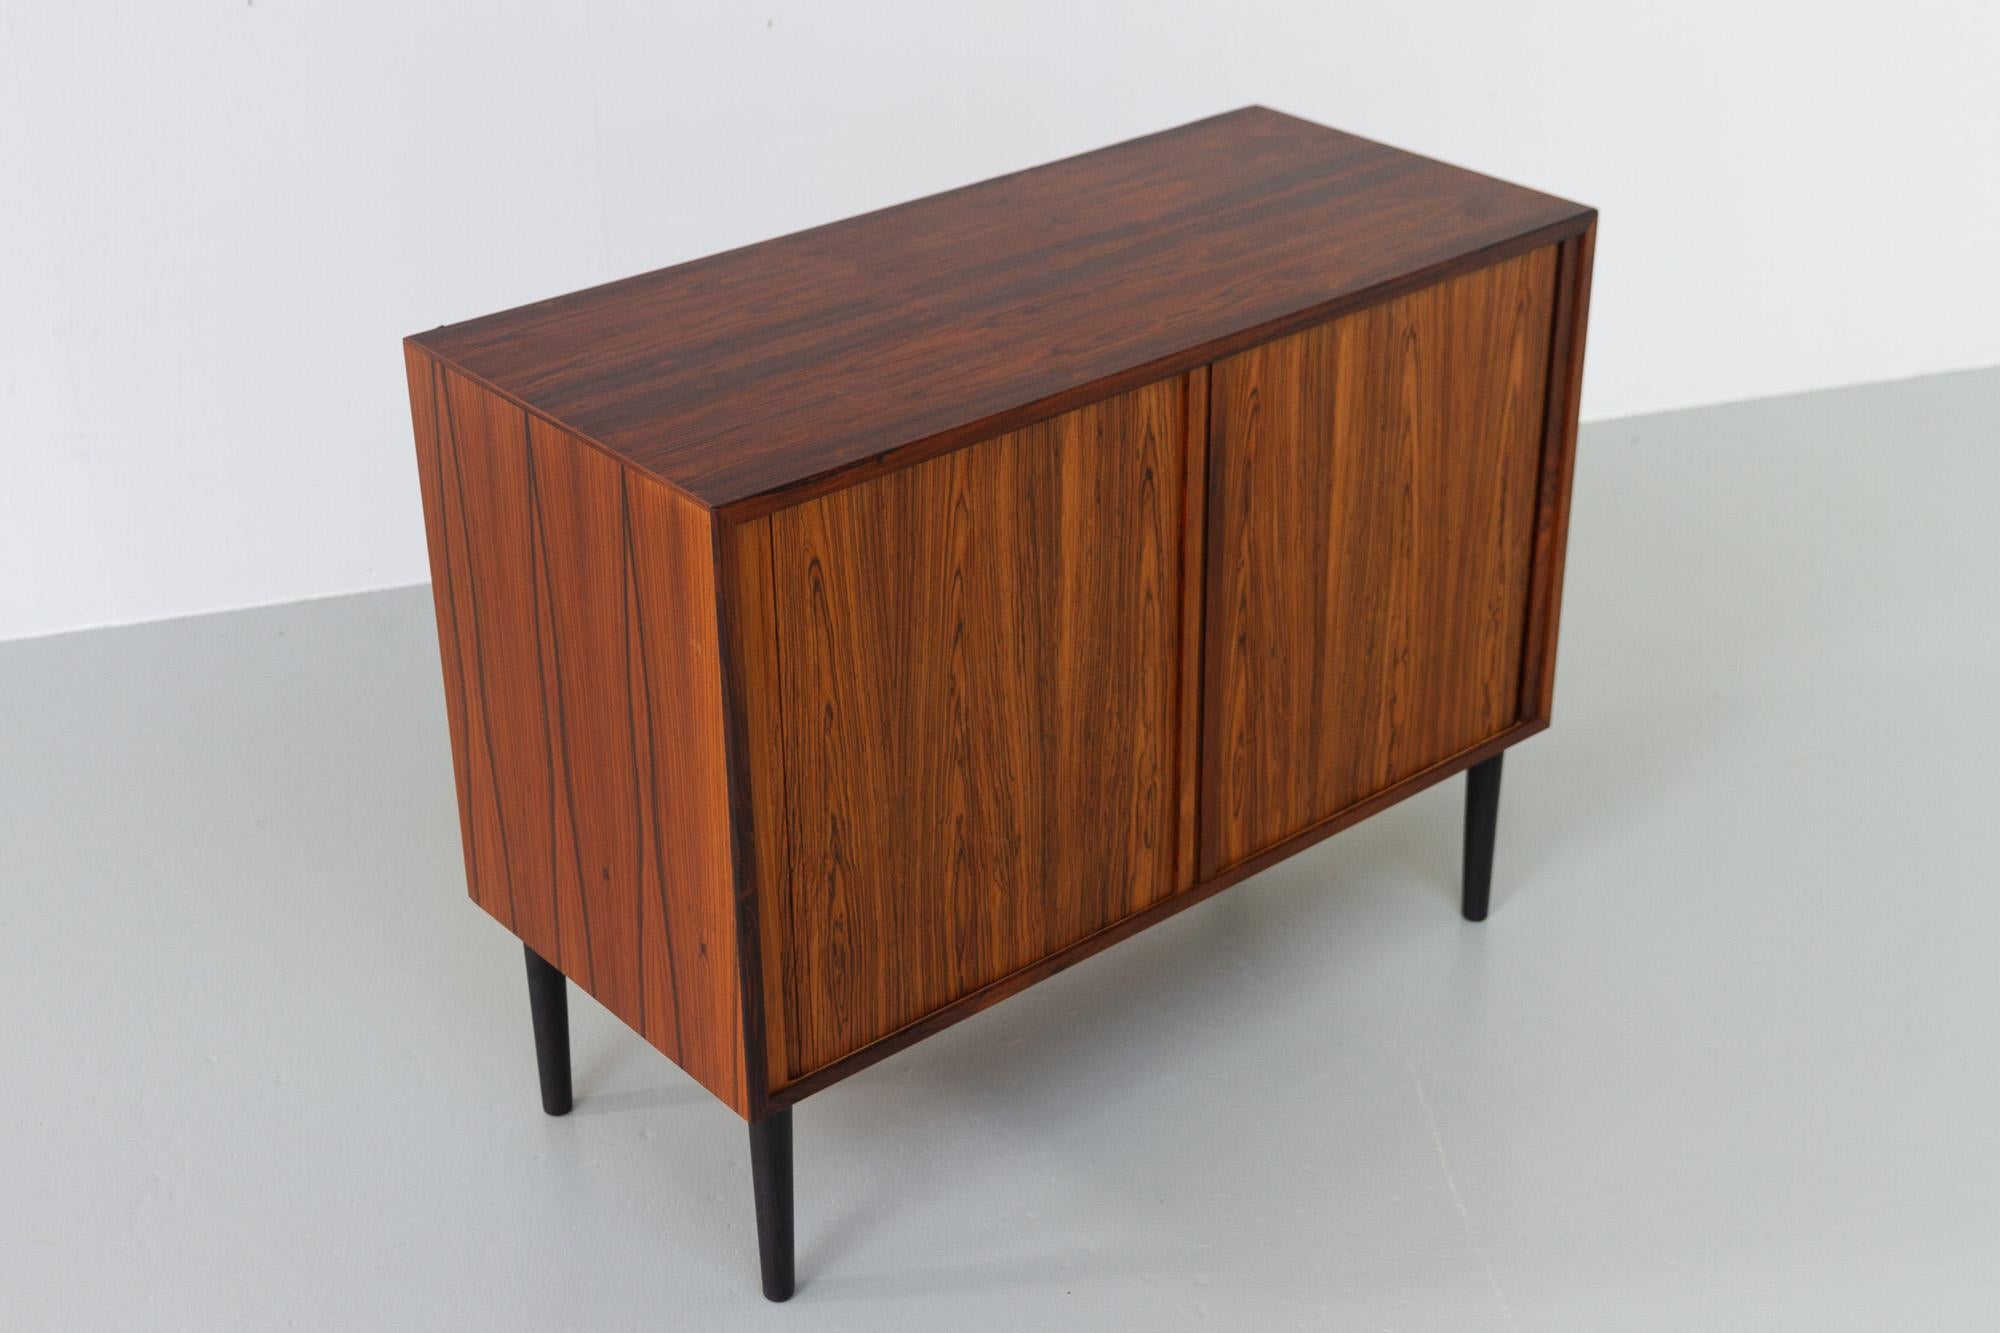 Vintage Danish Rosewood Sideboard with Tambour Doors by HG Furniture, 1960s.
Designed by Rud Thygesen og Johnny Sørensen for Hansen & Guldborg, Denmark.
This small Mid-Century Modern Rosewood sideboard is part of the HG Wall unit system. The